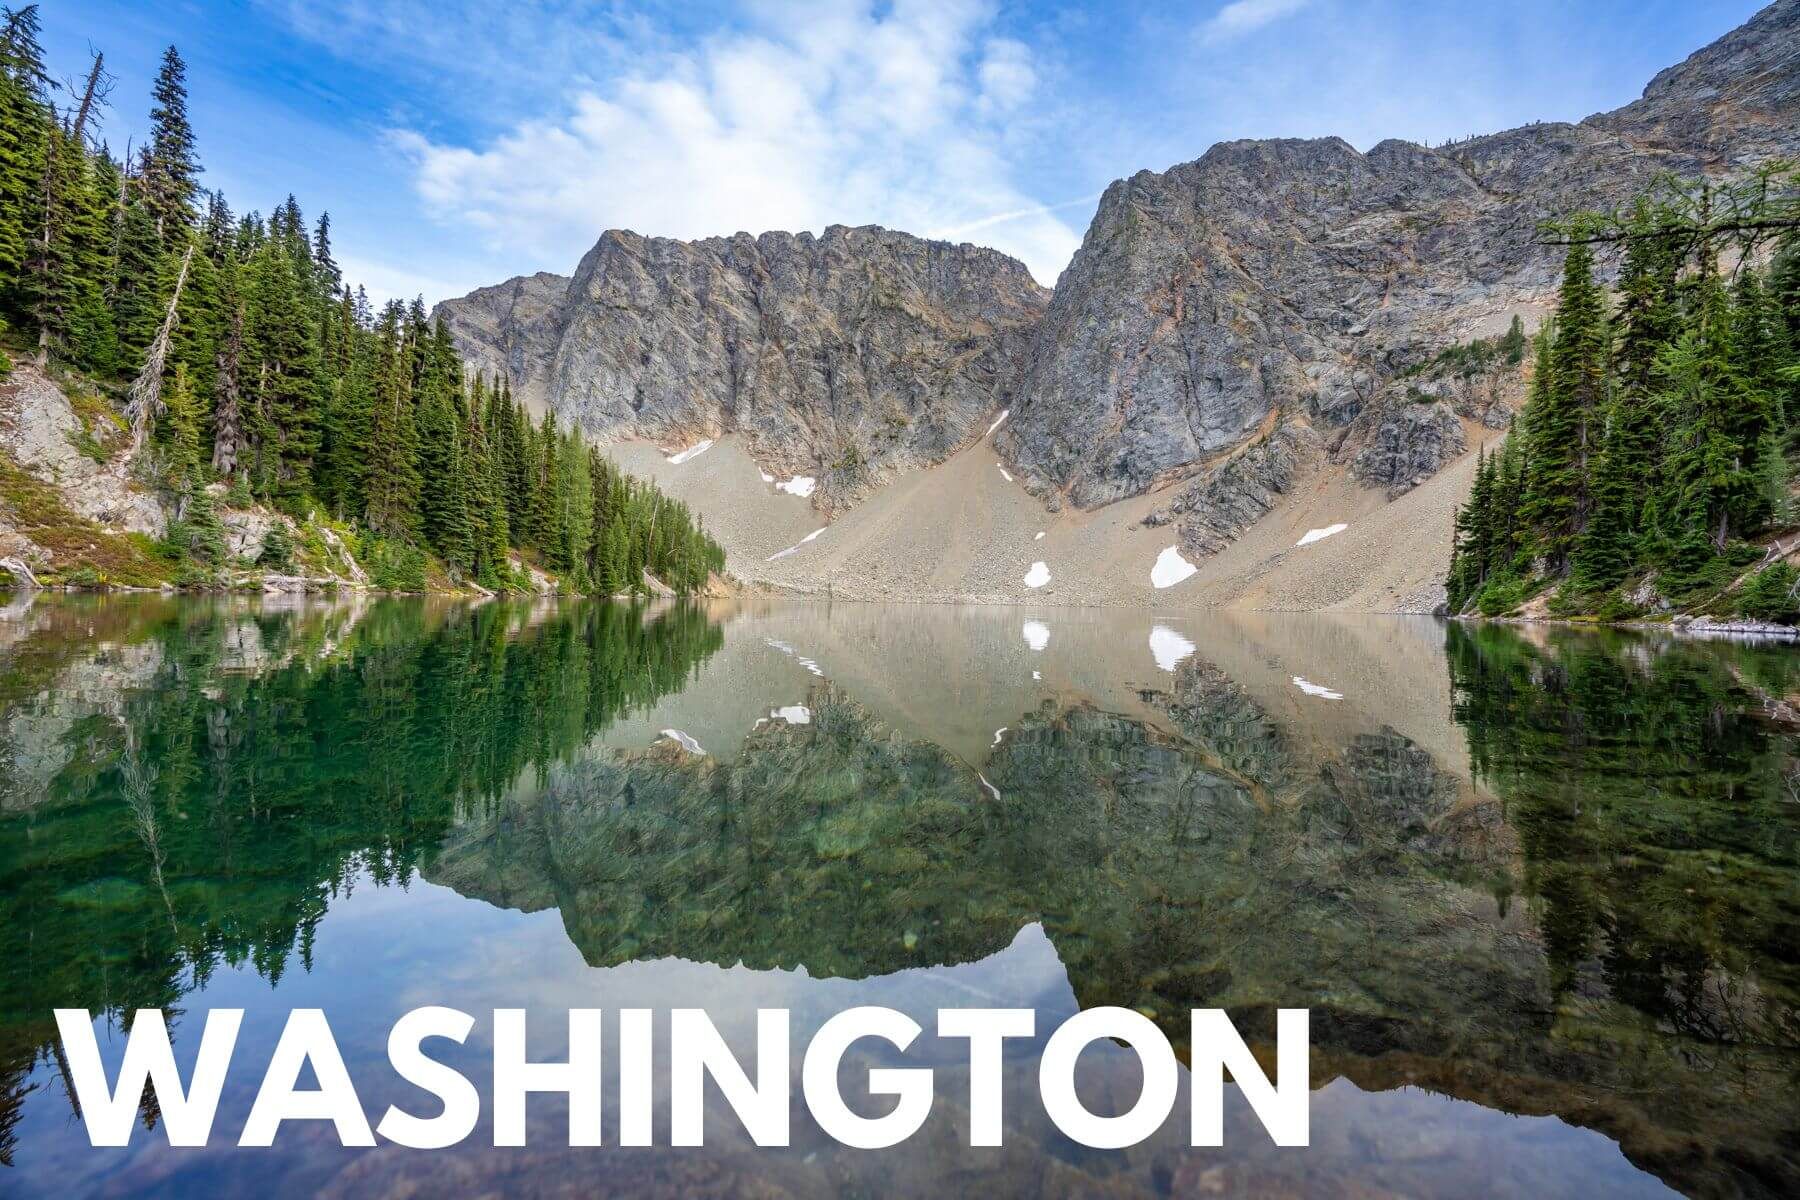 Photo of a still lake with mountains and trees reflecting in North Cascades with the word Washington overlaid